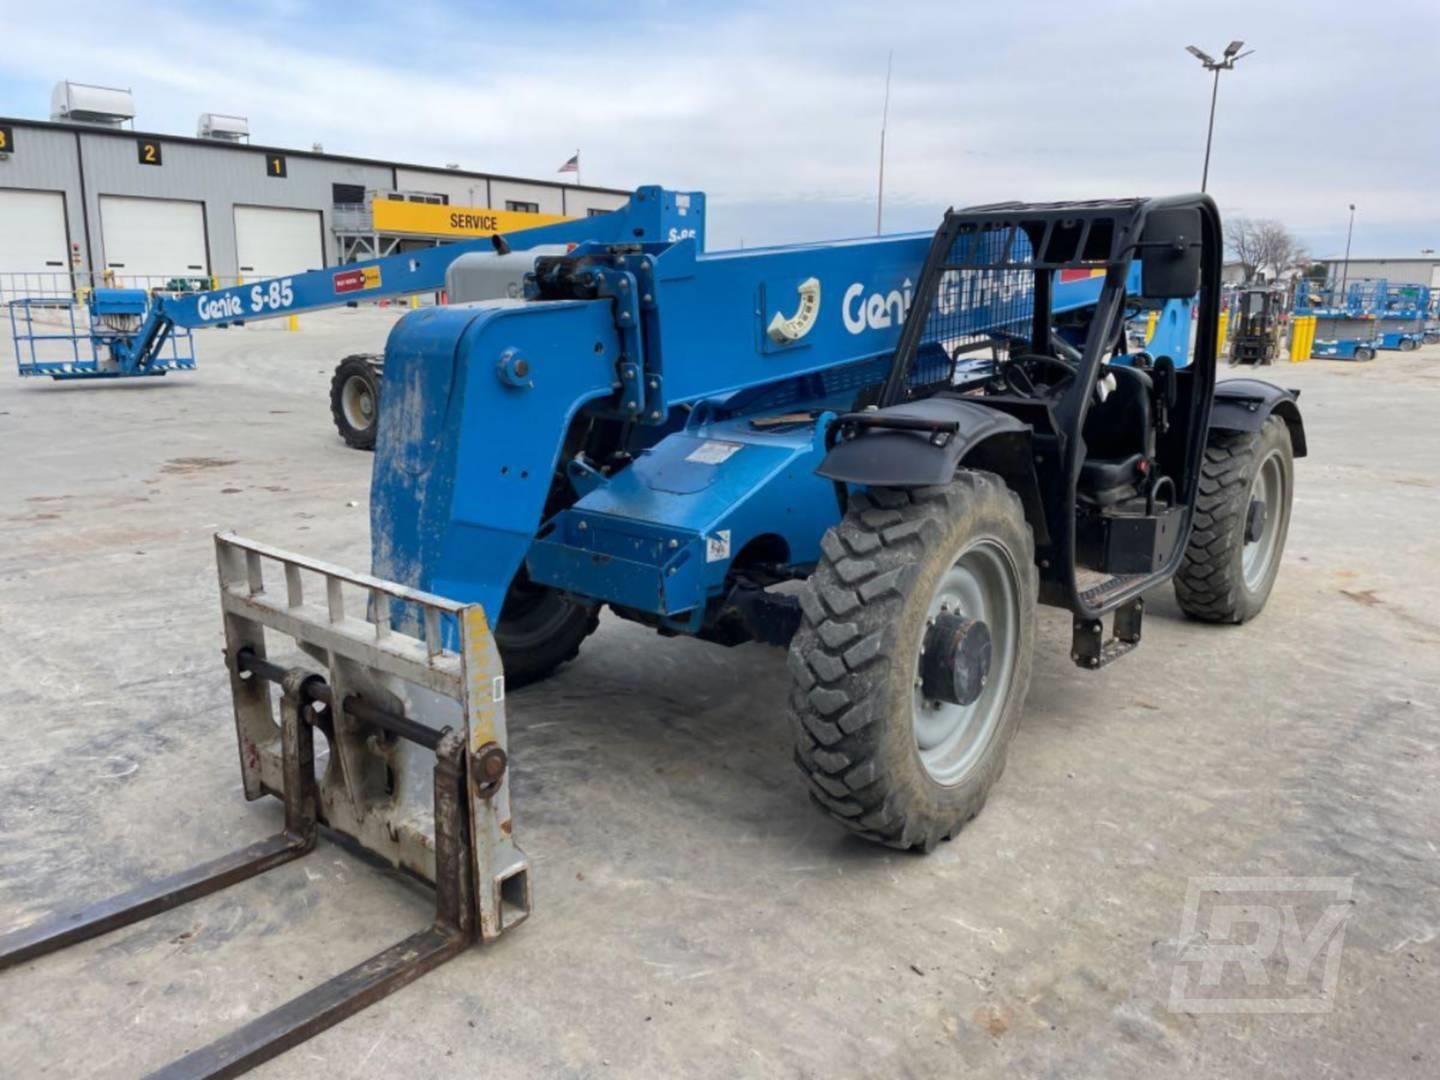 Genie Z-45 FE Boom Lift for Sale and Rent - CanLift